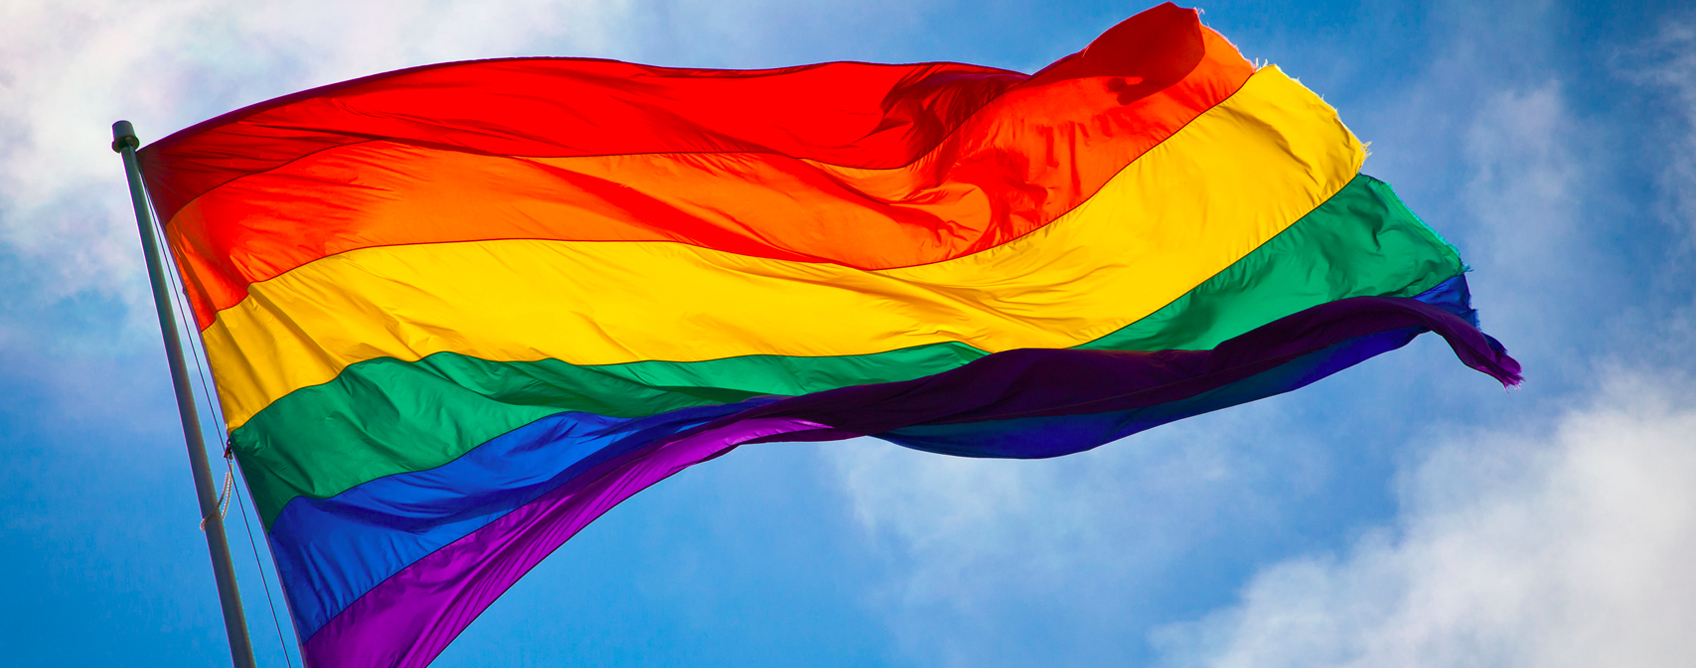 Five Things Regional Banks Can Learn from the Top LGBT-Friendly Financial Brands